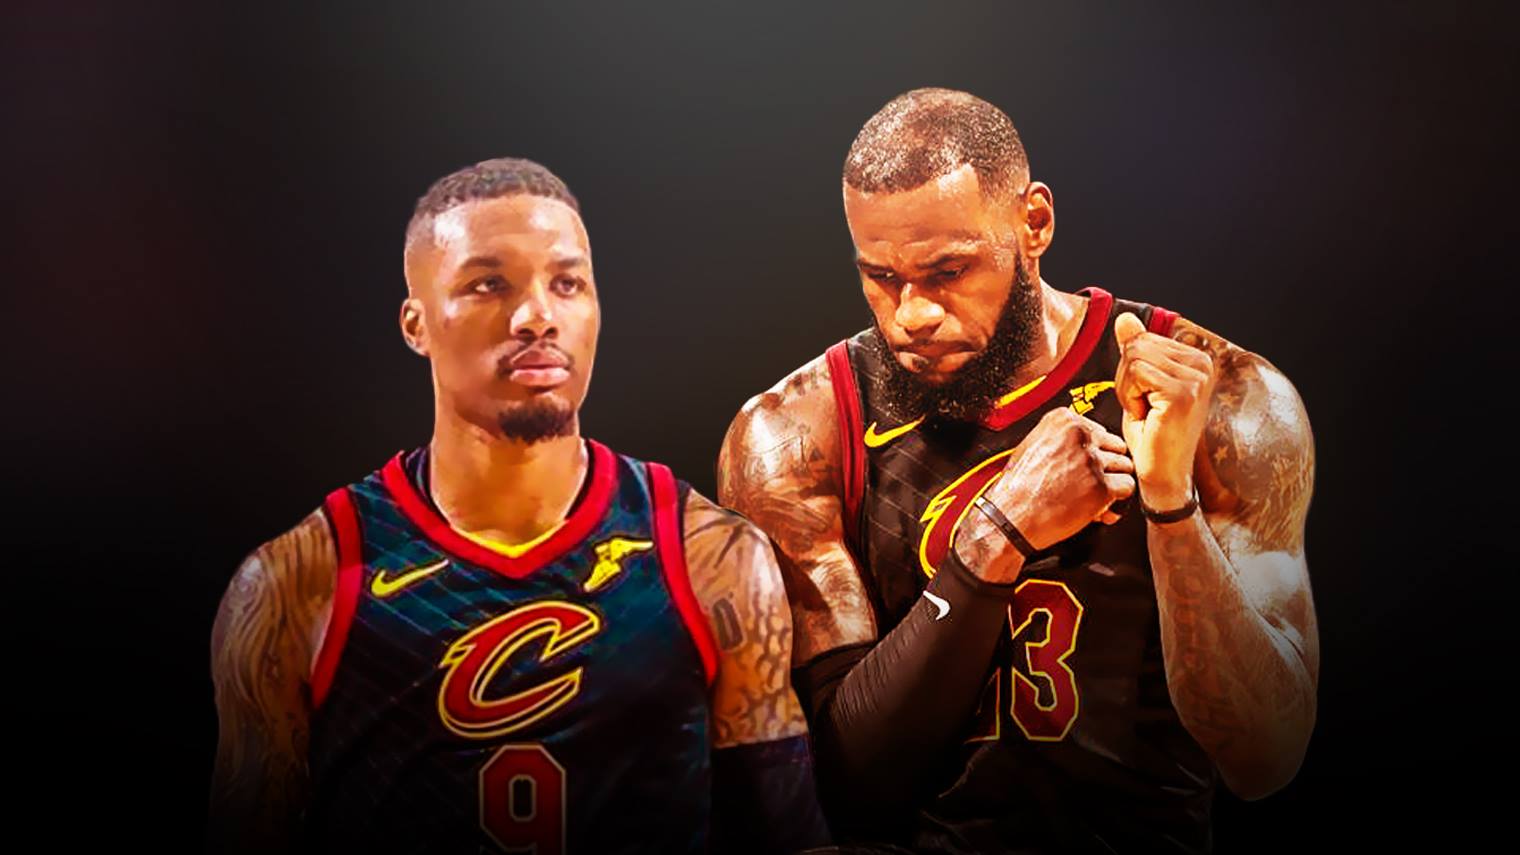 What LeBron James and Damian Lillard on the Cavs would look like